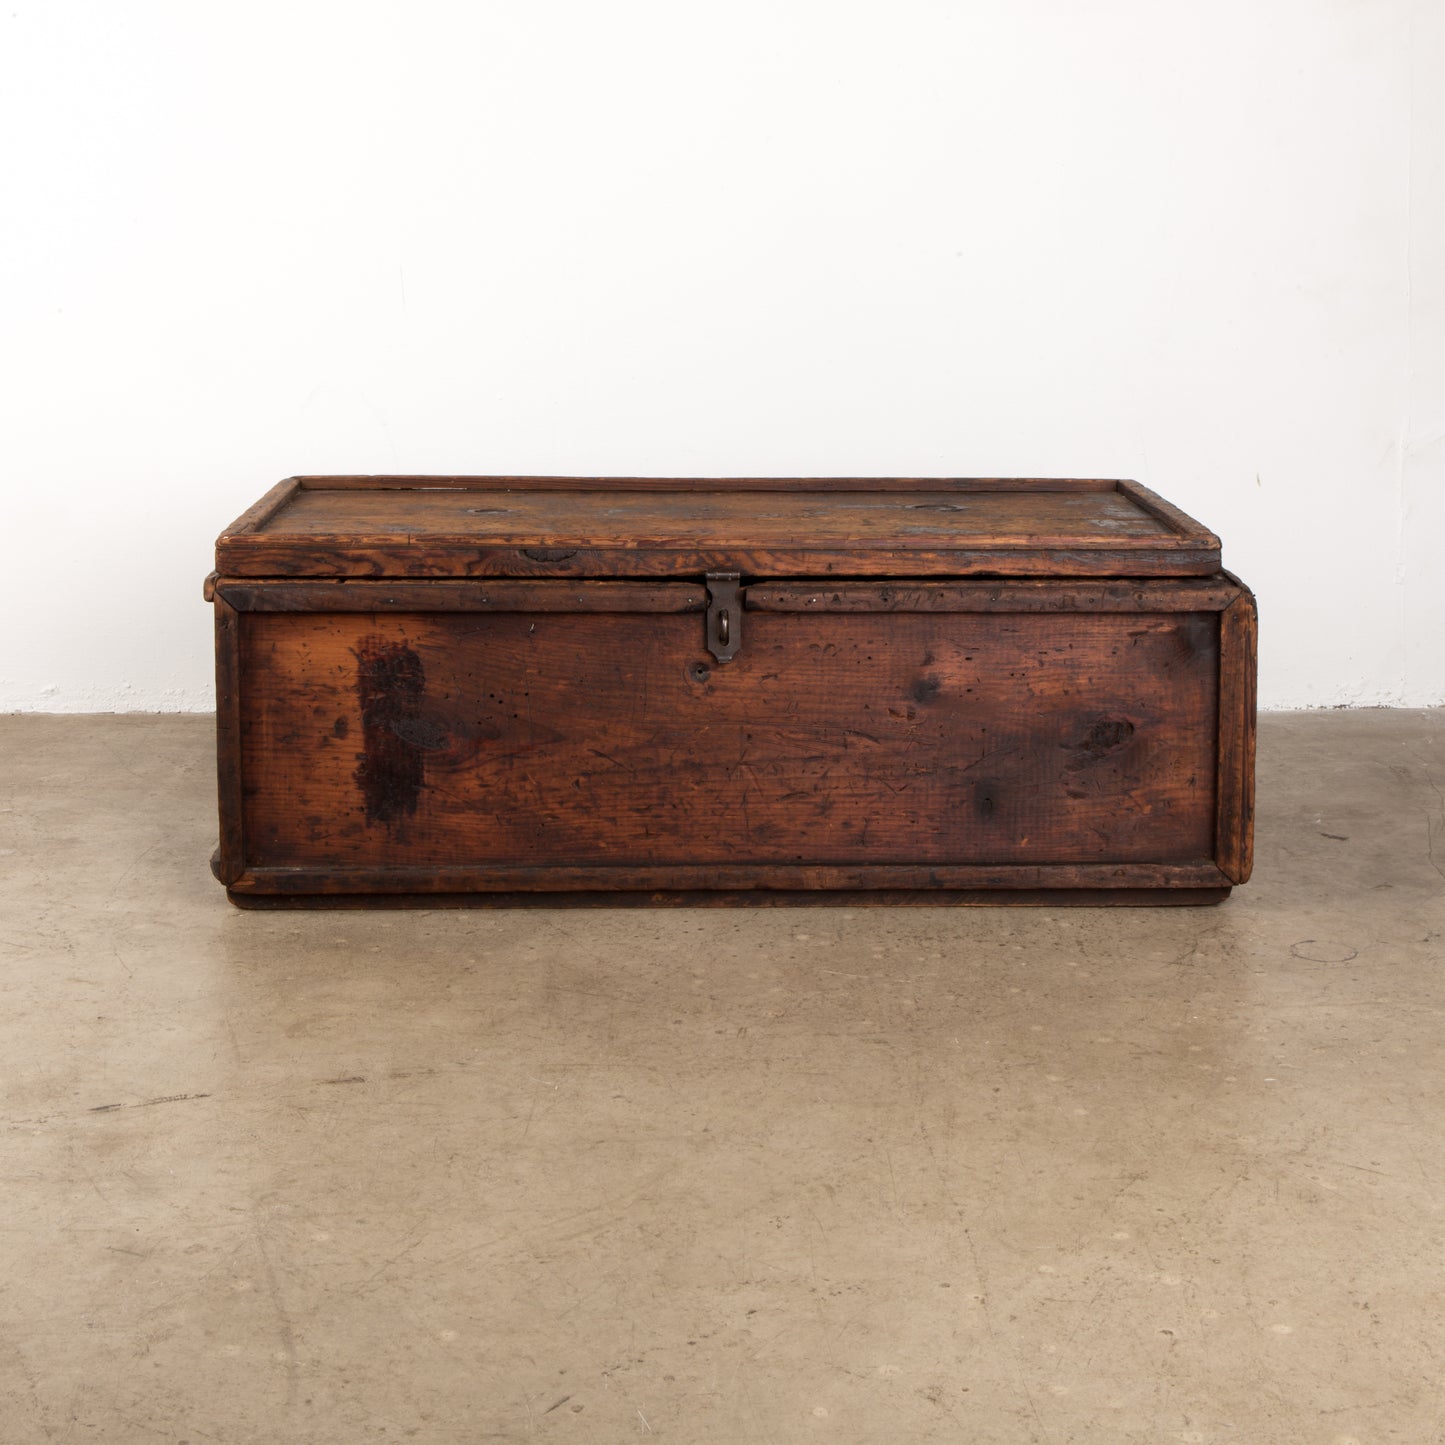 Early 20th Century  Wooden box